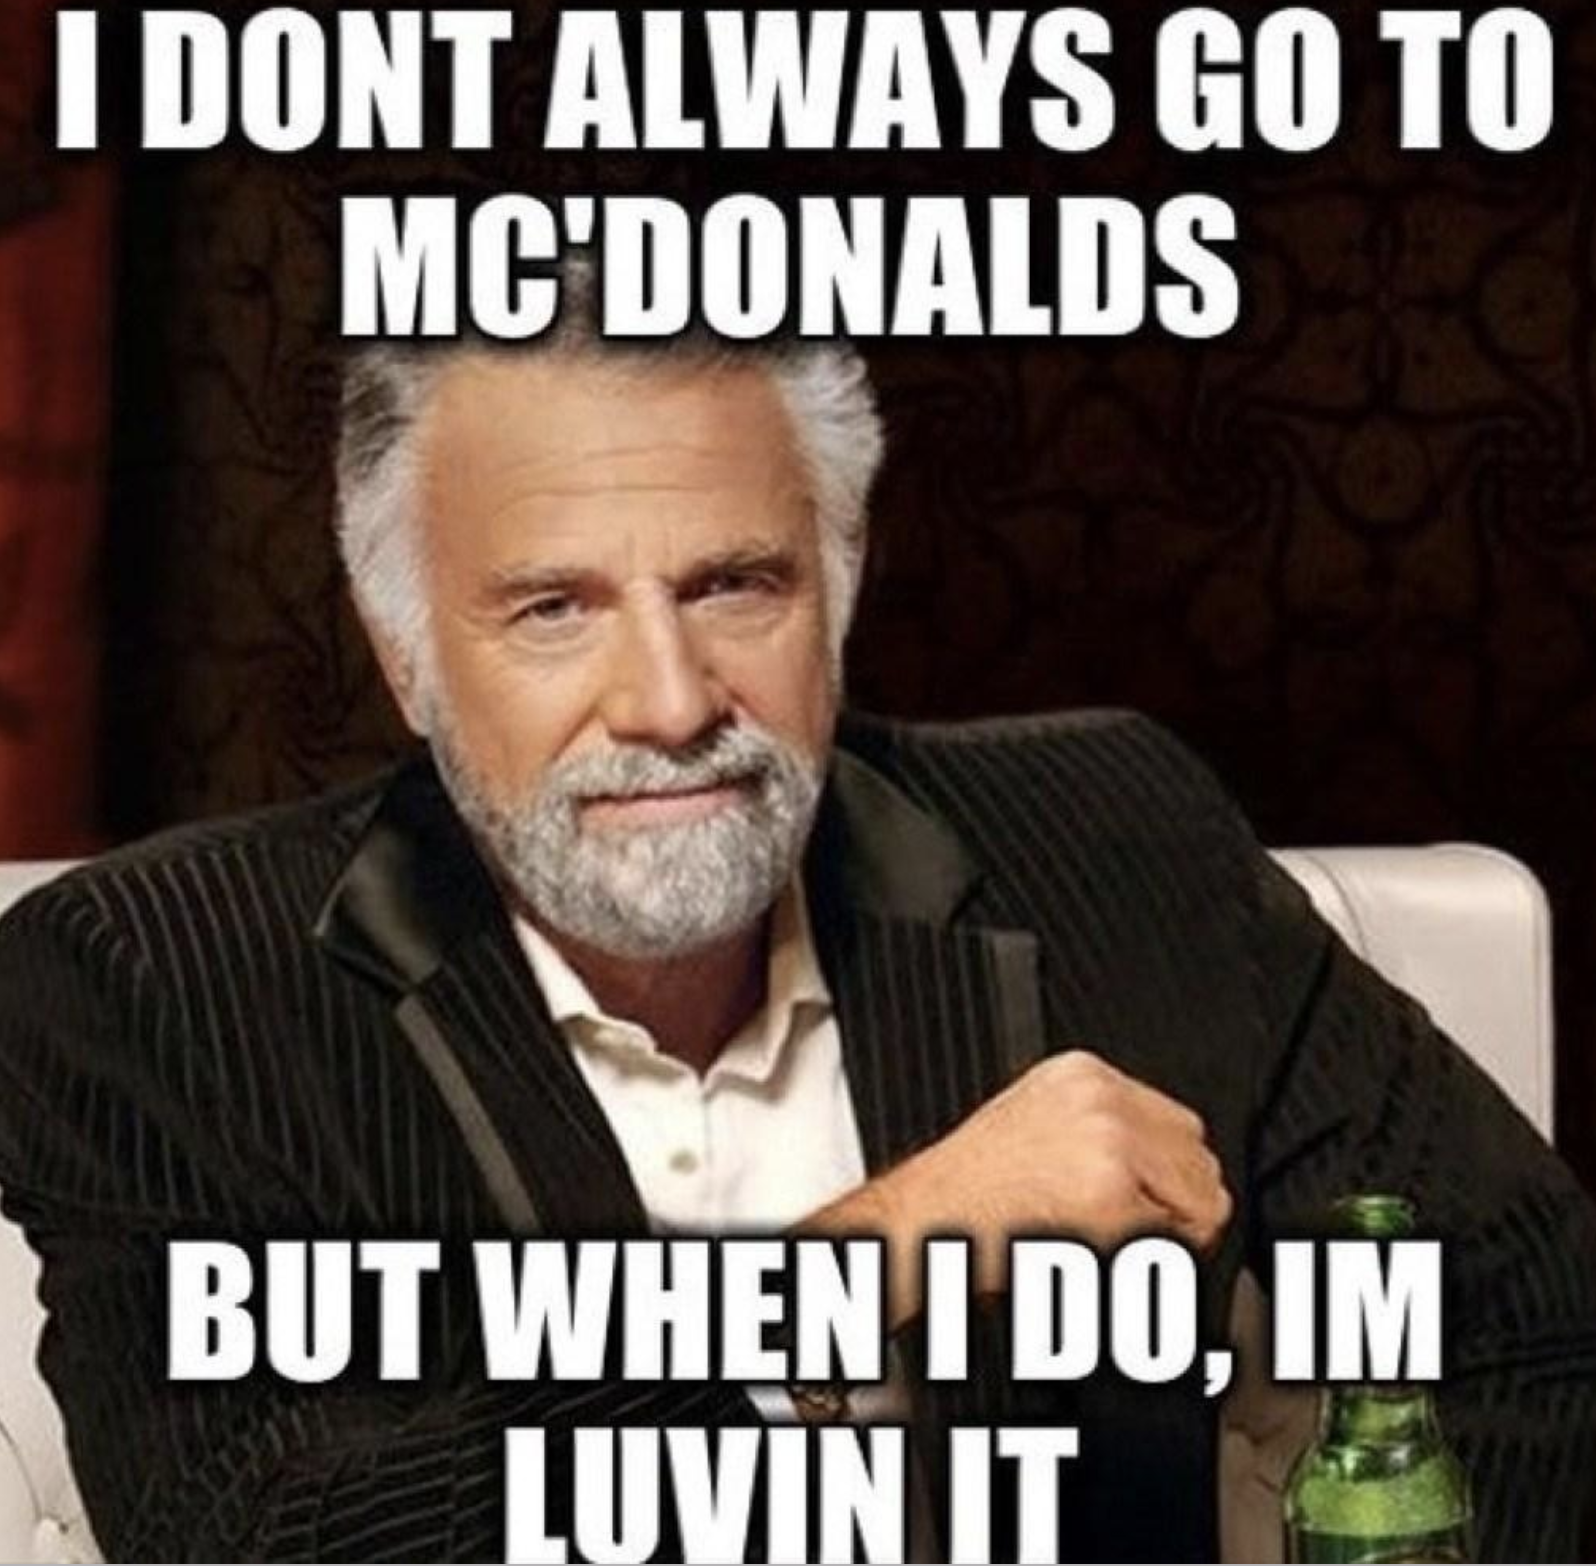 Actor Jonathan Goldsmith in a meme as the "world's most interesting man."